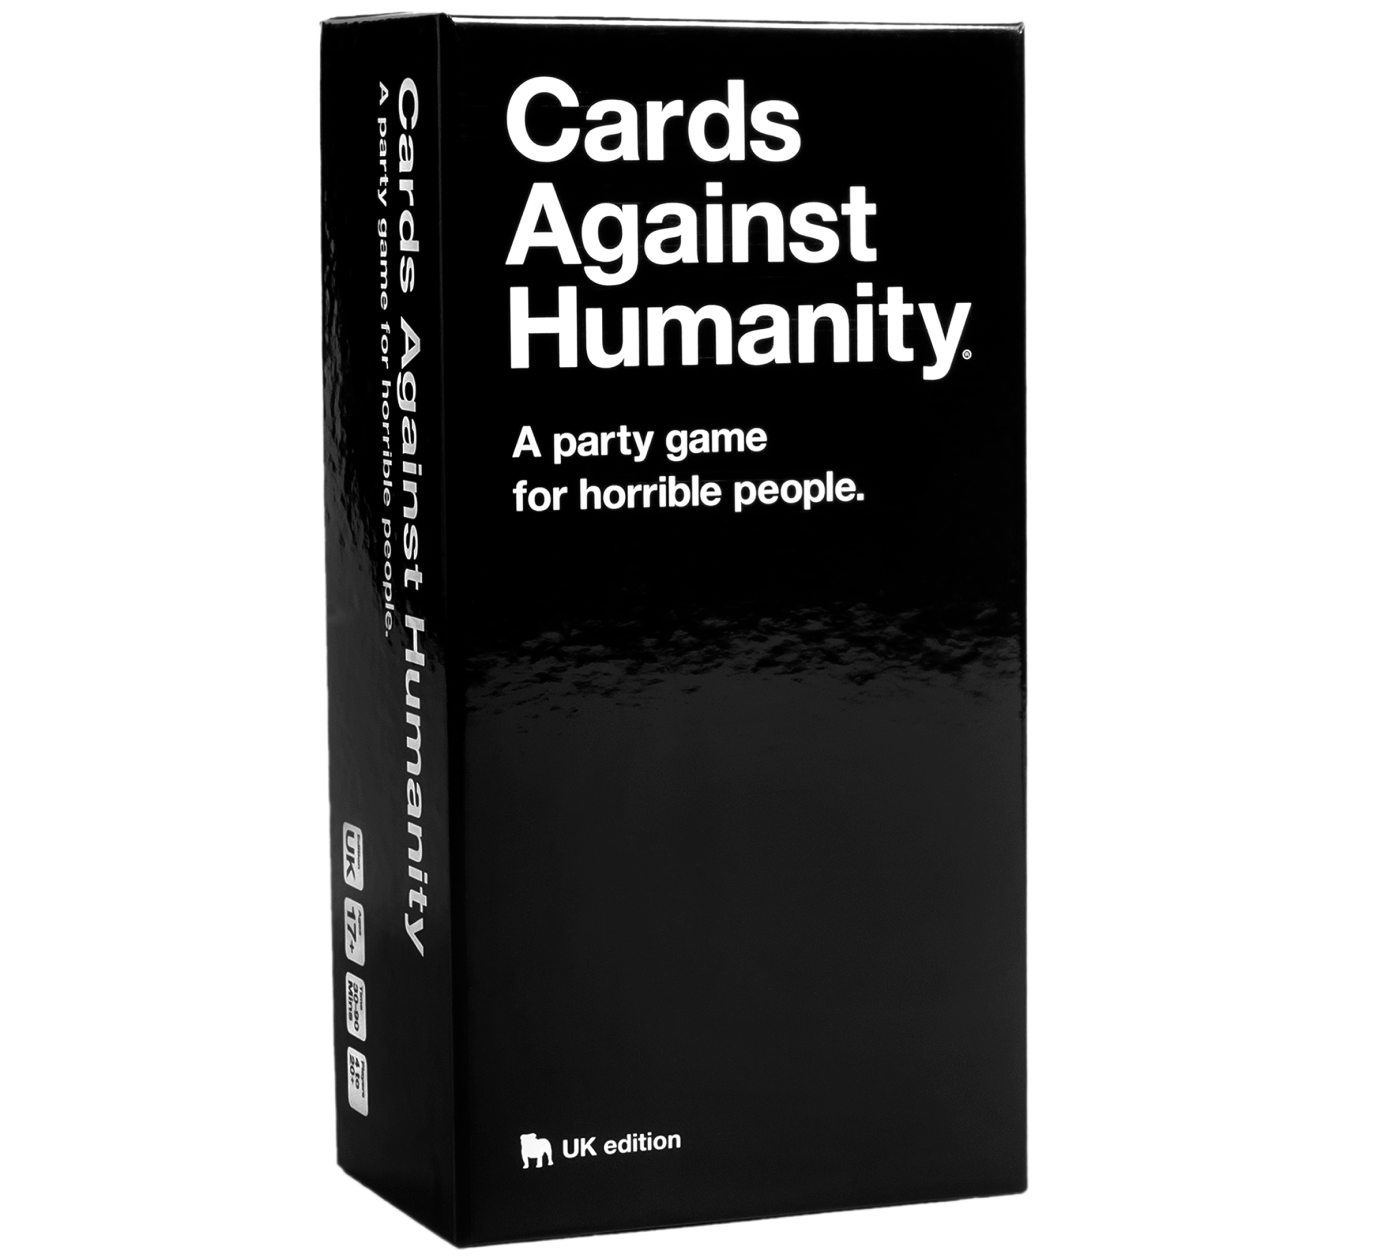 Cards Against Humanity Cards Against Humanity UK Edition Adult Card Game Complete 